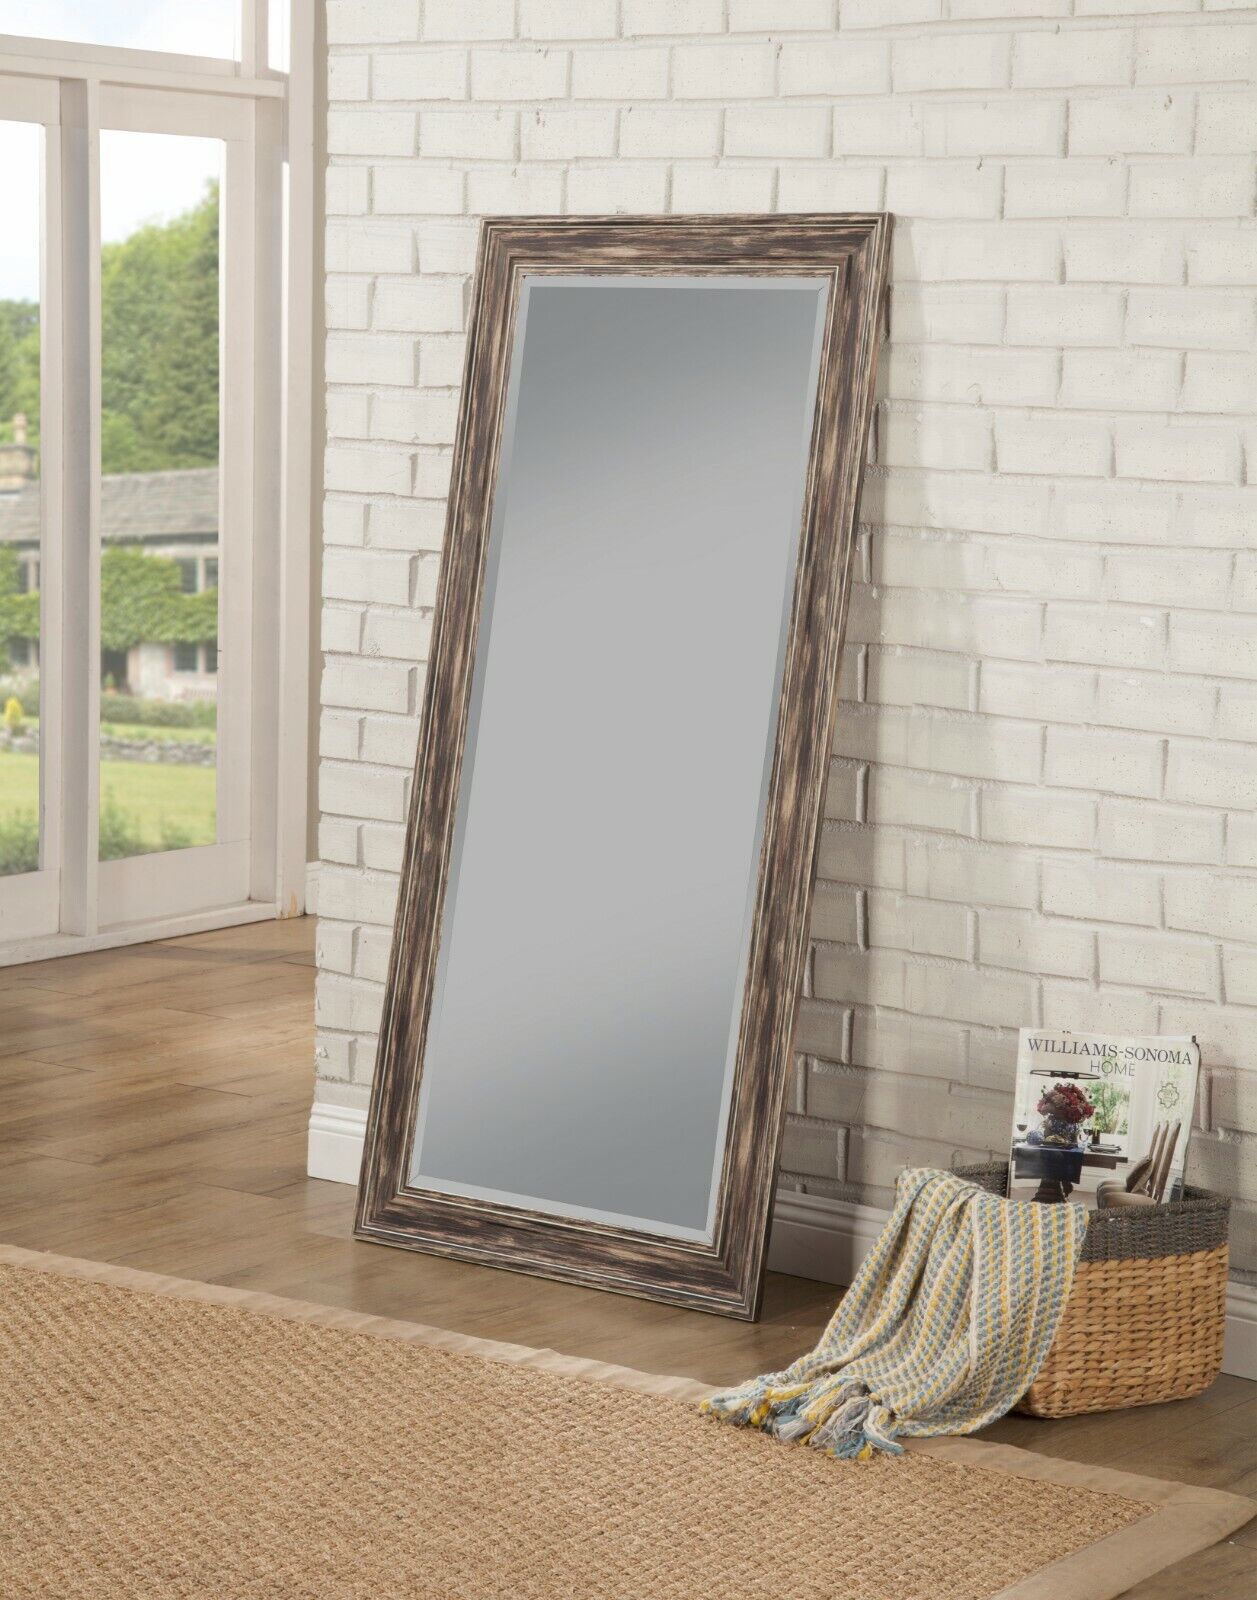 Sandberg Furniture Full Length Mirror Large Antique Wall Leaning Standing Floor Mirrors For Bedroom